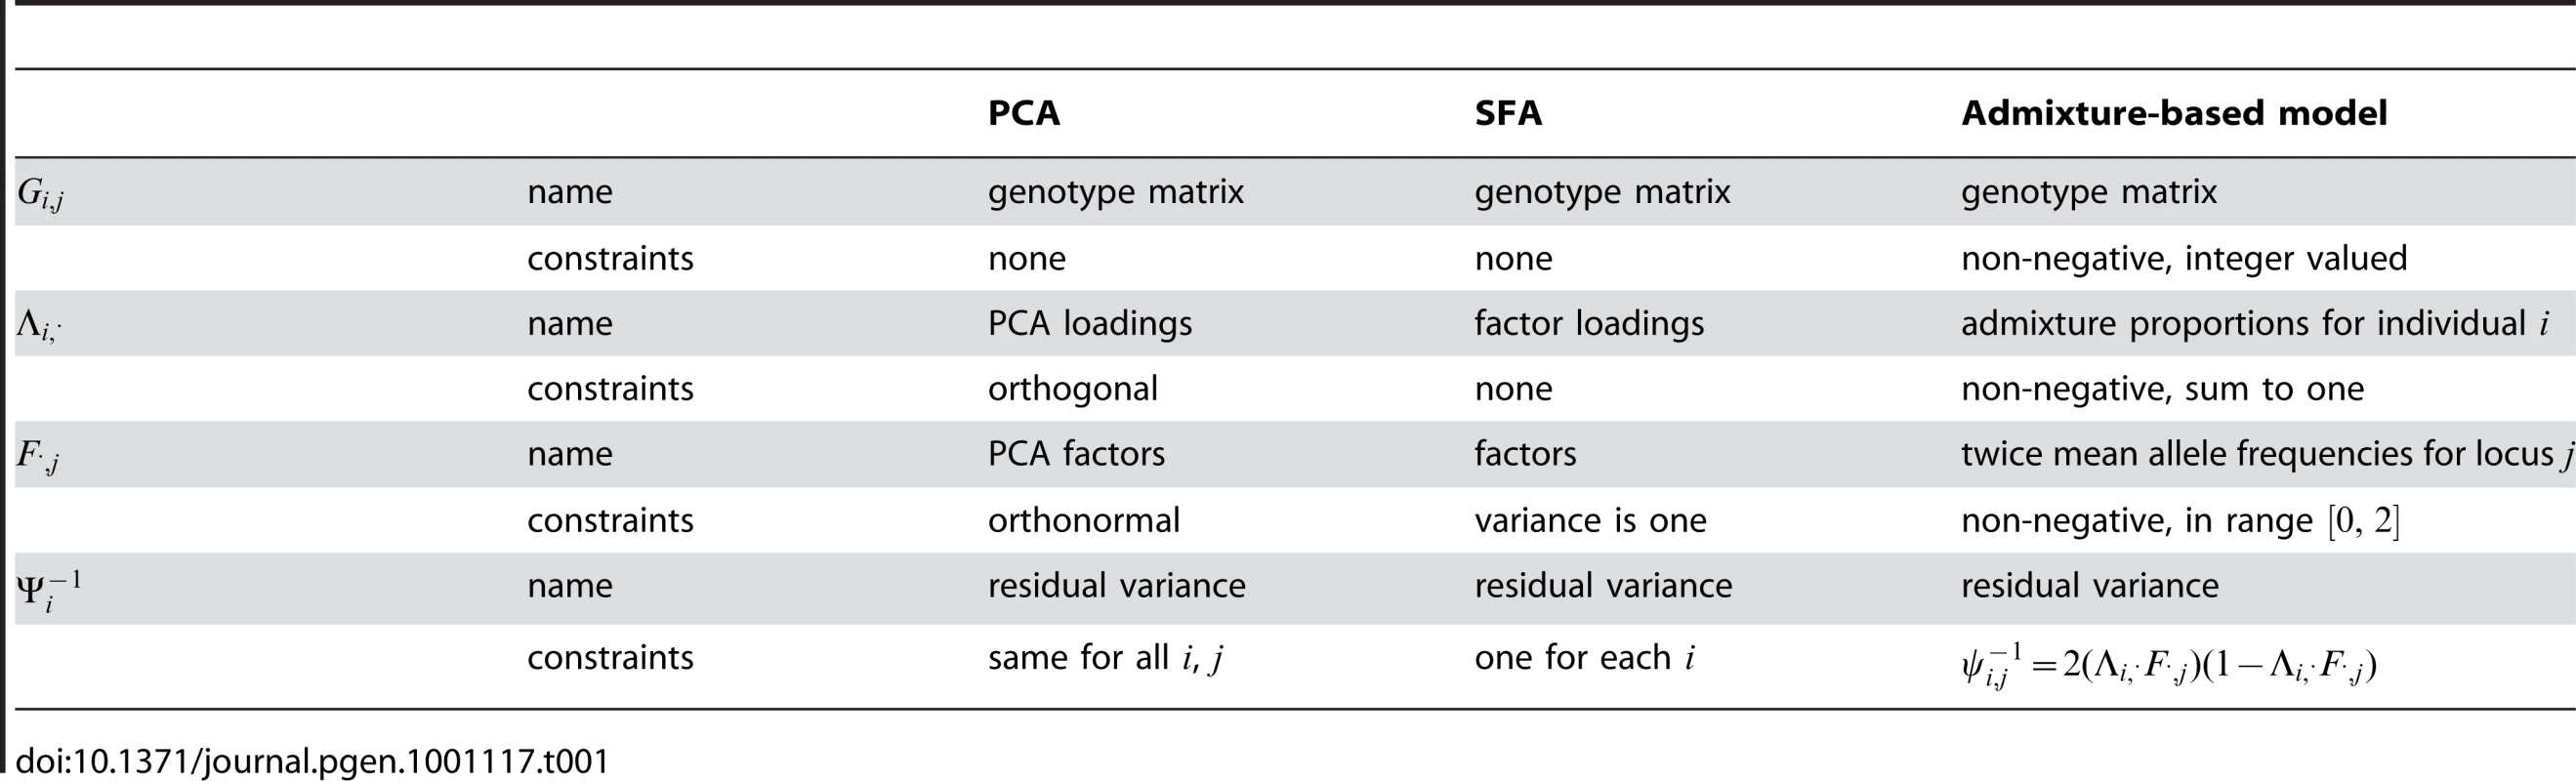 Relationship of terms in PCA, SFA, and admixture-based models.